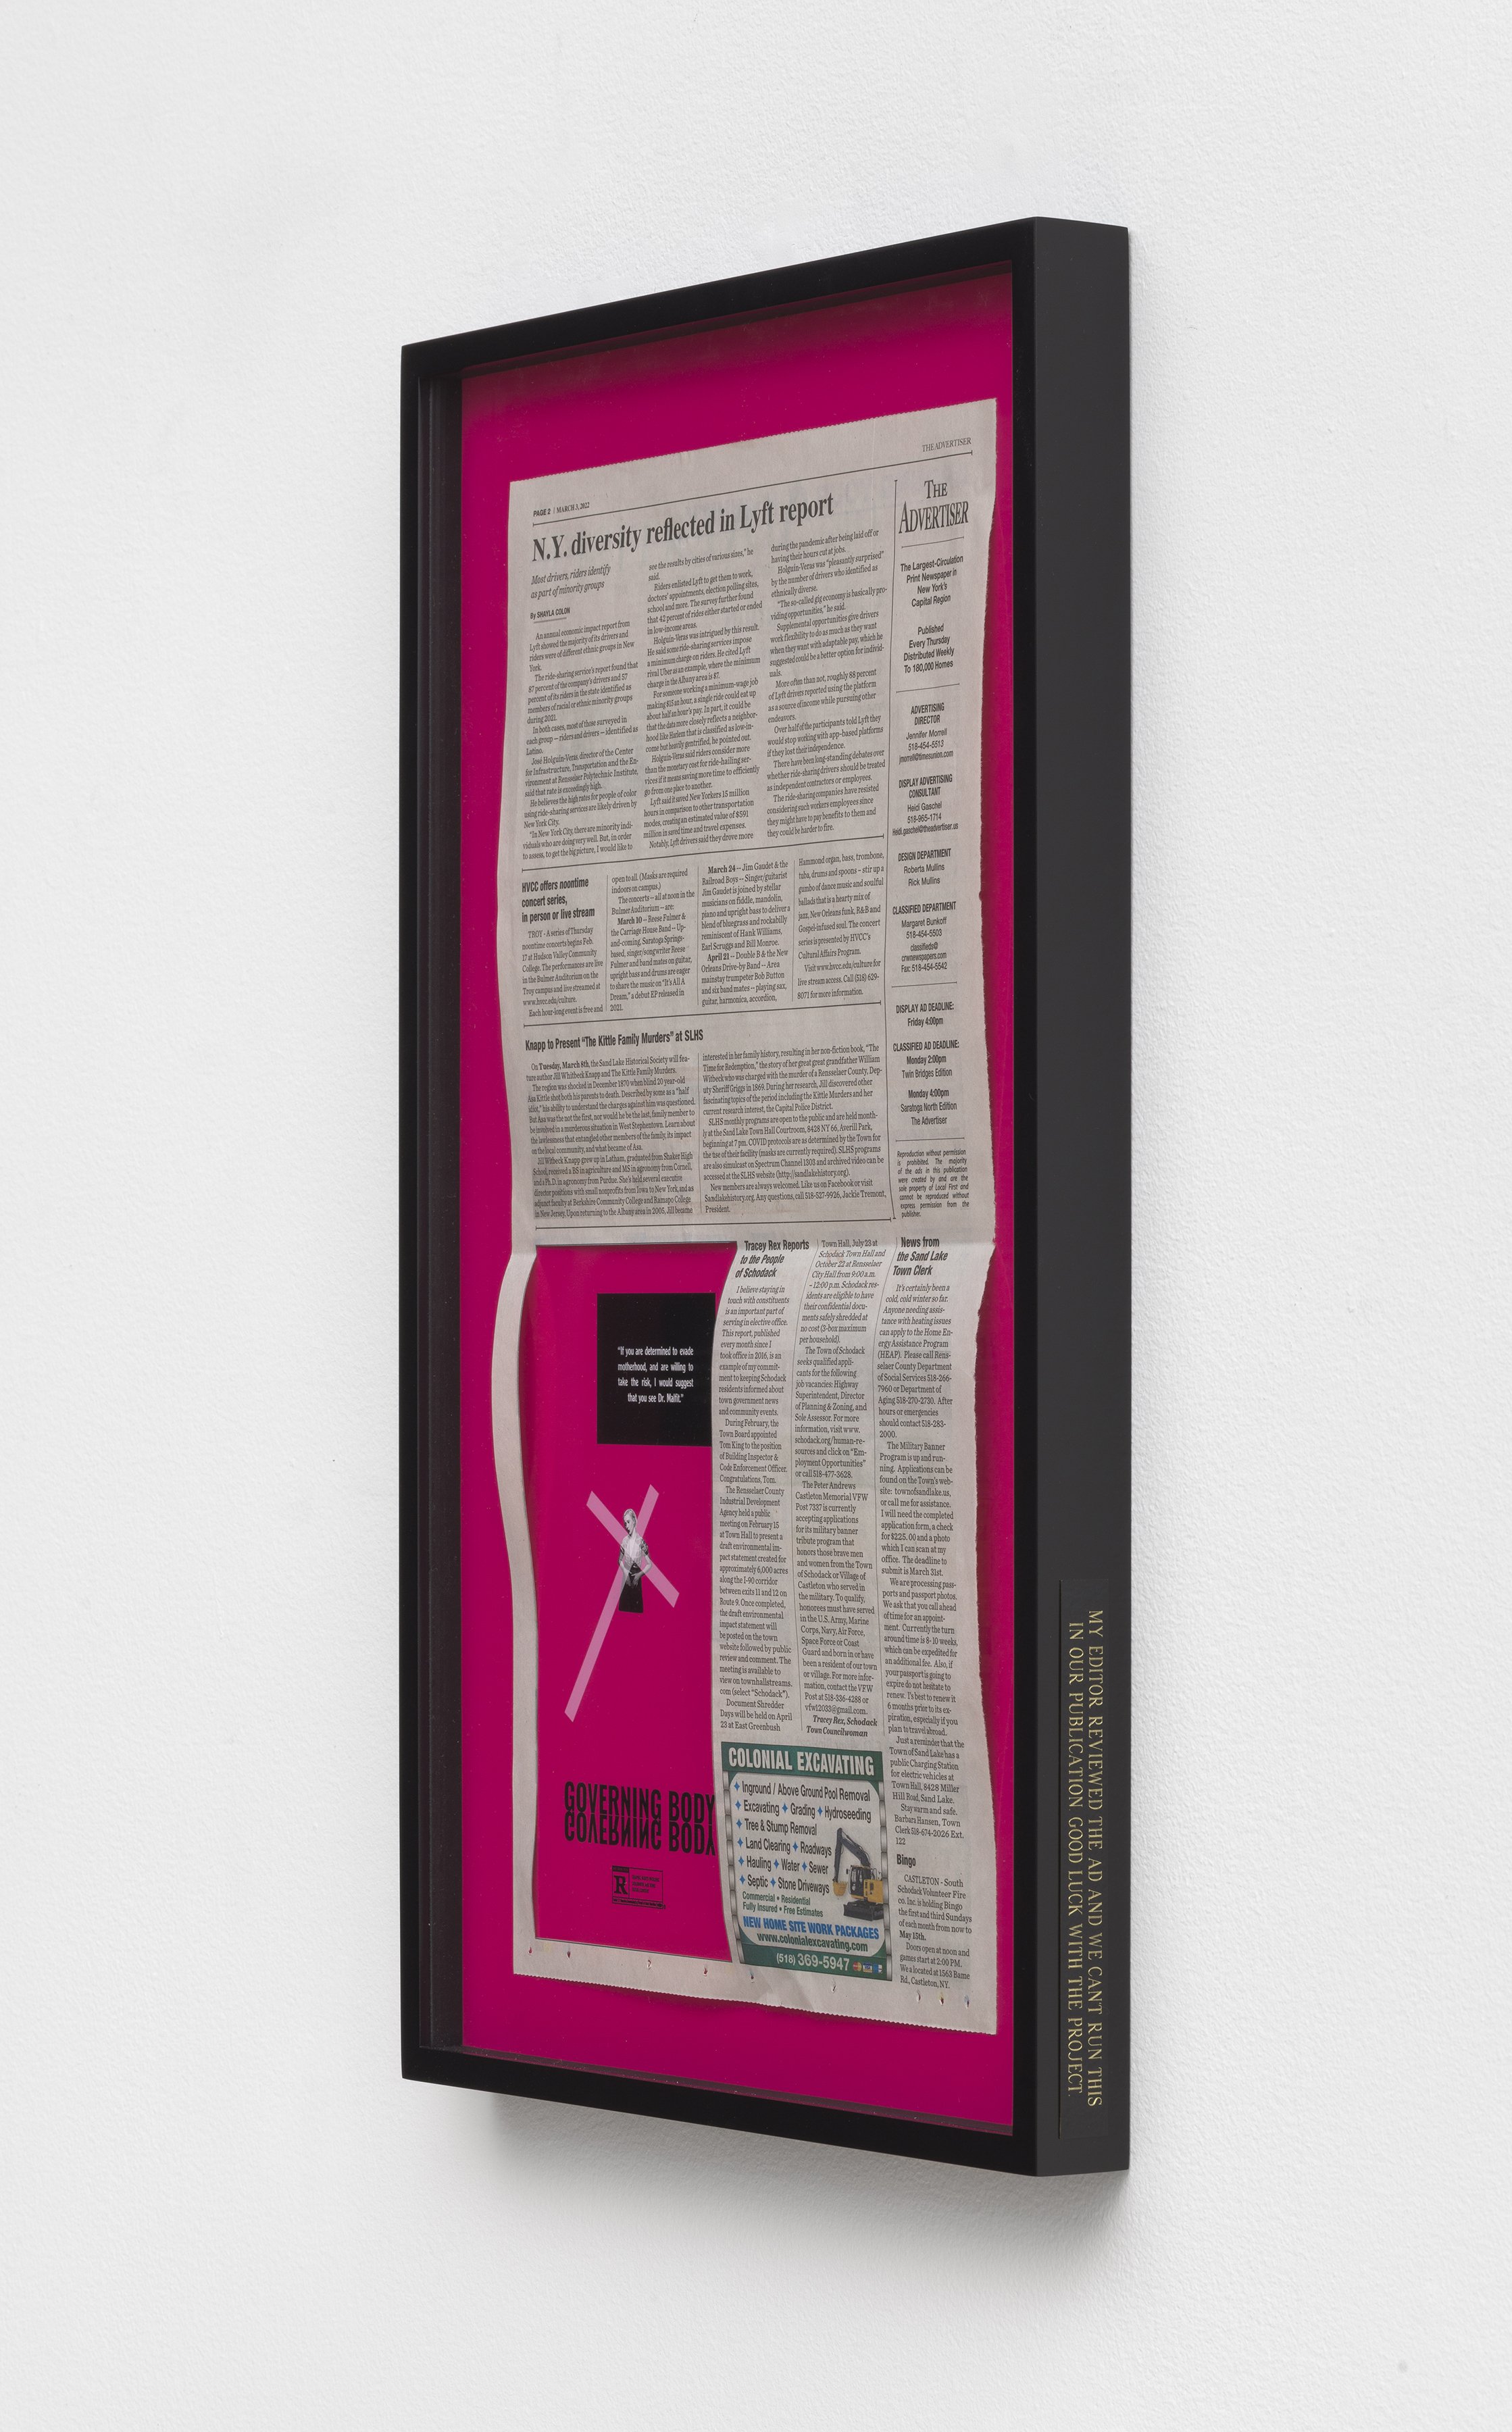   My editor reviewed the ad and we can’t run this in our publication. Good luck with the project.  (side view), 2022 Newspaper, poster, and plaque 23 x 13 inches&nbsp;     ABOUT MOTION PICTURE DIVISION   